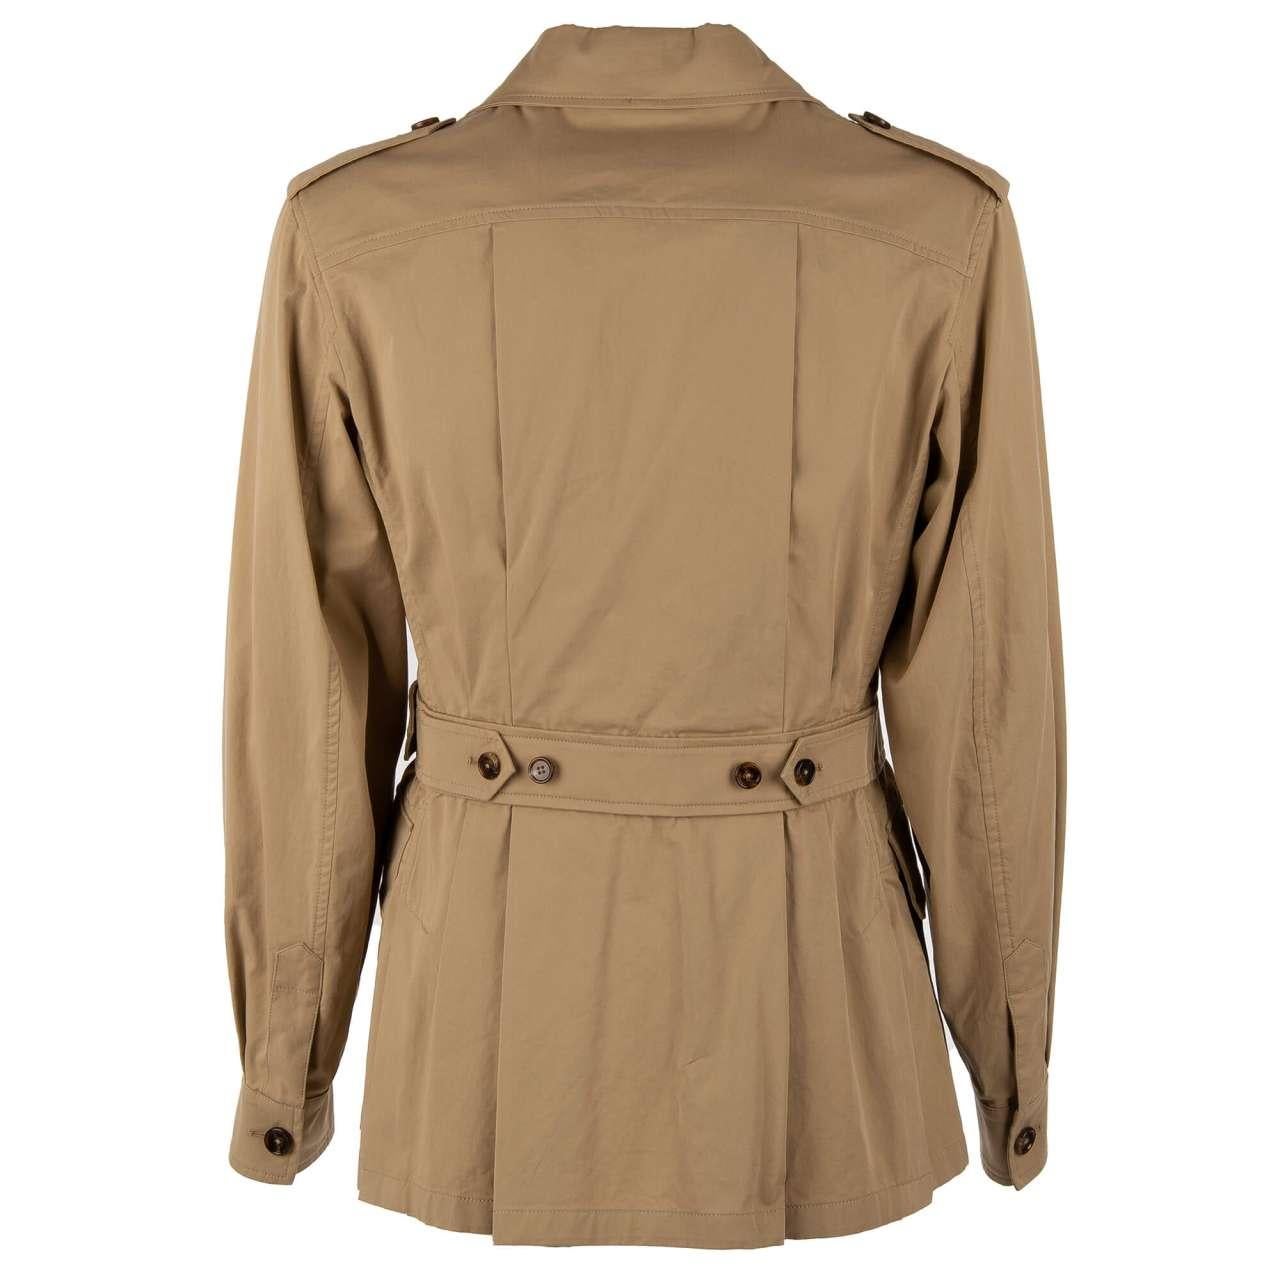 - Canvas Safari Jacket SNEAK PEEK with a large picture patch, belts and pockets by DOLCE & GABBANA - Former RRP: EUR 1.550 - New with tag - Slim Fit - MADE IN ITALY - Model: G9RS1T-FUFJ9-M0263 - Material: 97% Cotton, 3% Elastan - Color: Beige -